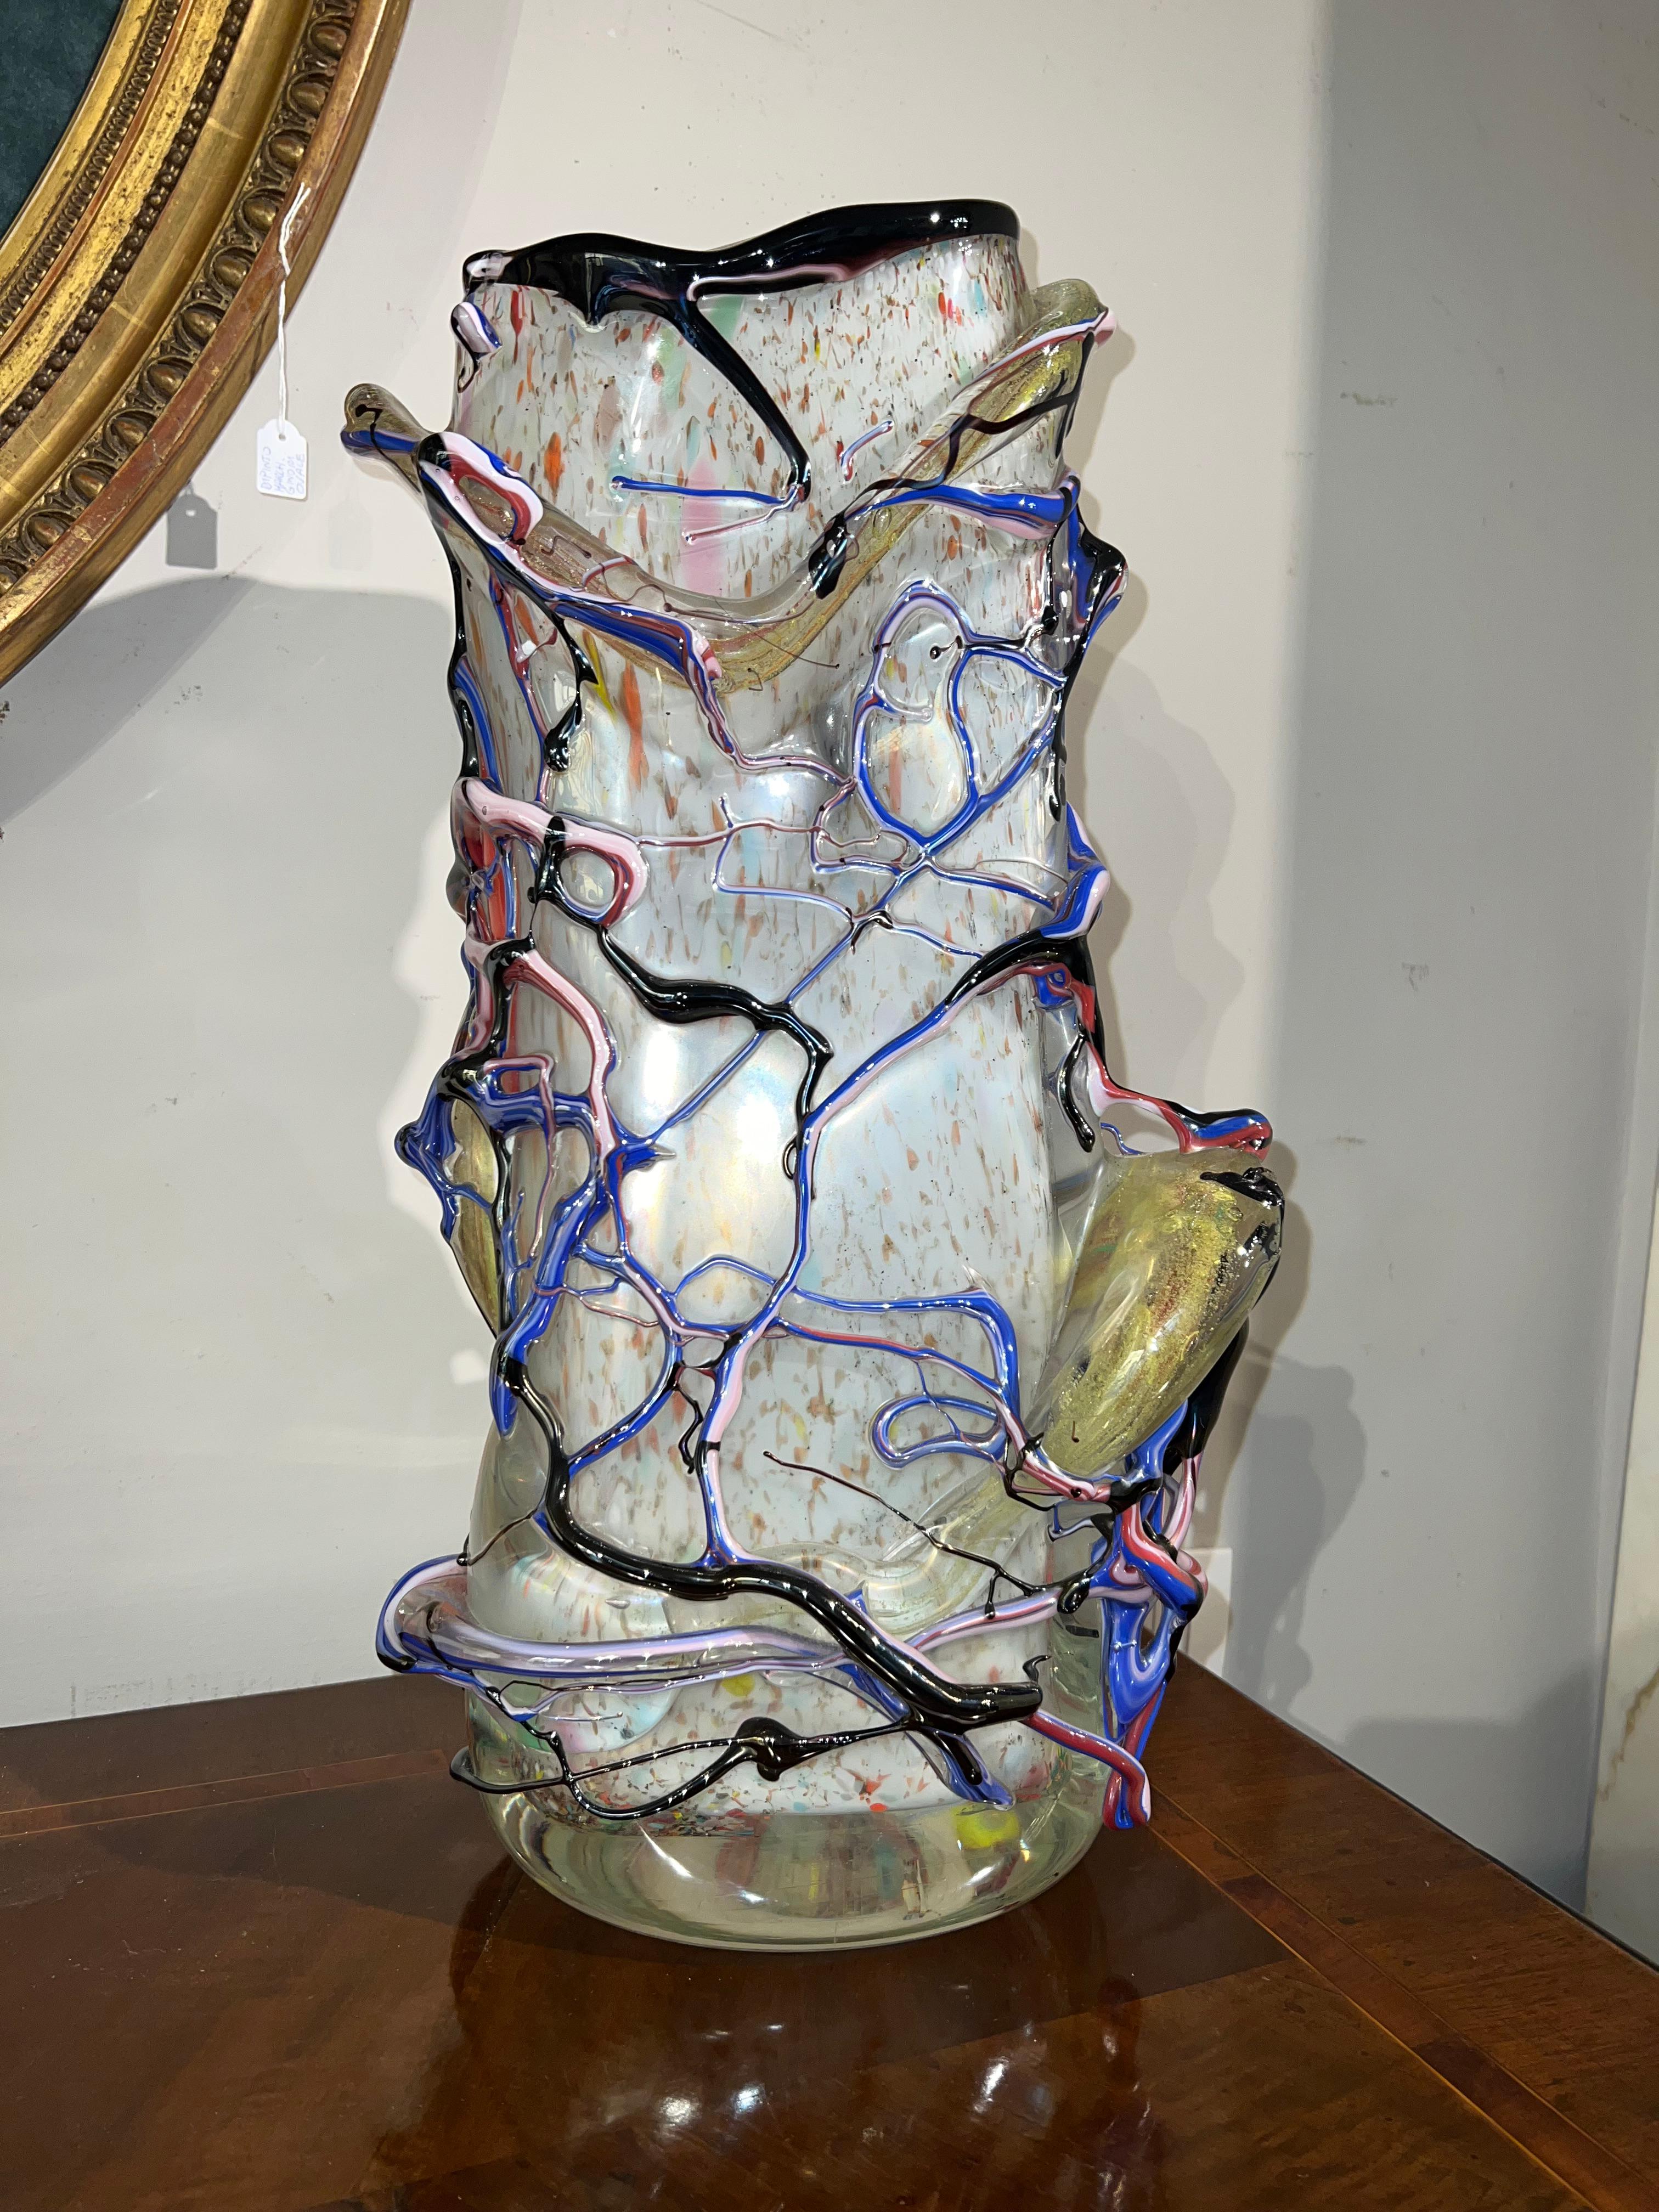 Beautiful and unique Murano glass vase. This vase was made with skill, using milky glass for the interior and a polychrome filiform branch structure for the exterior. The polychrome colored glass decorations give this vase an attractive and elegant